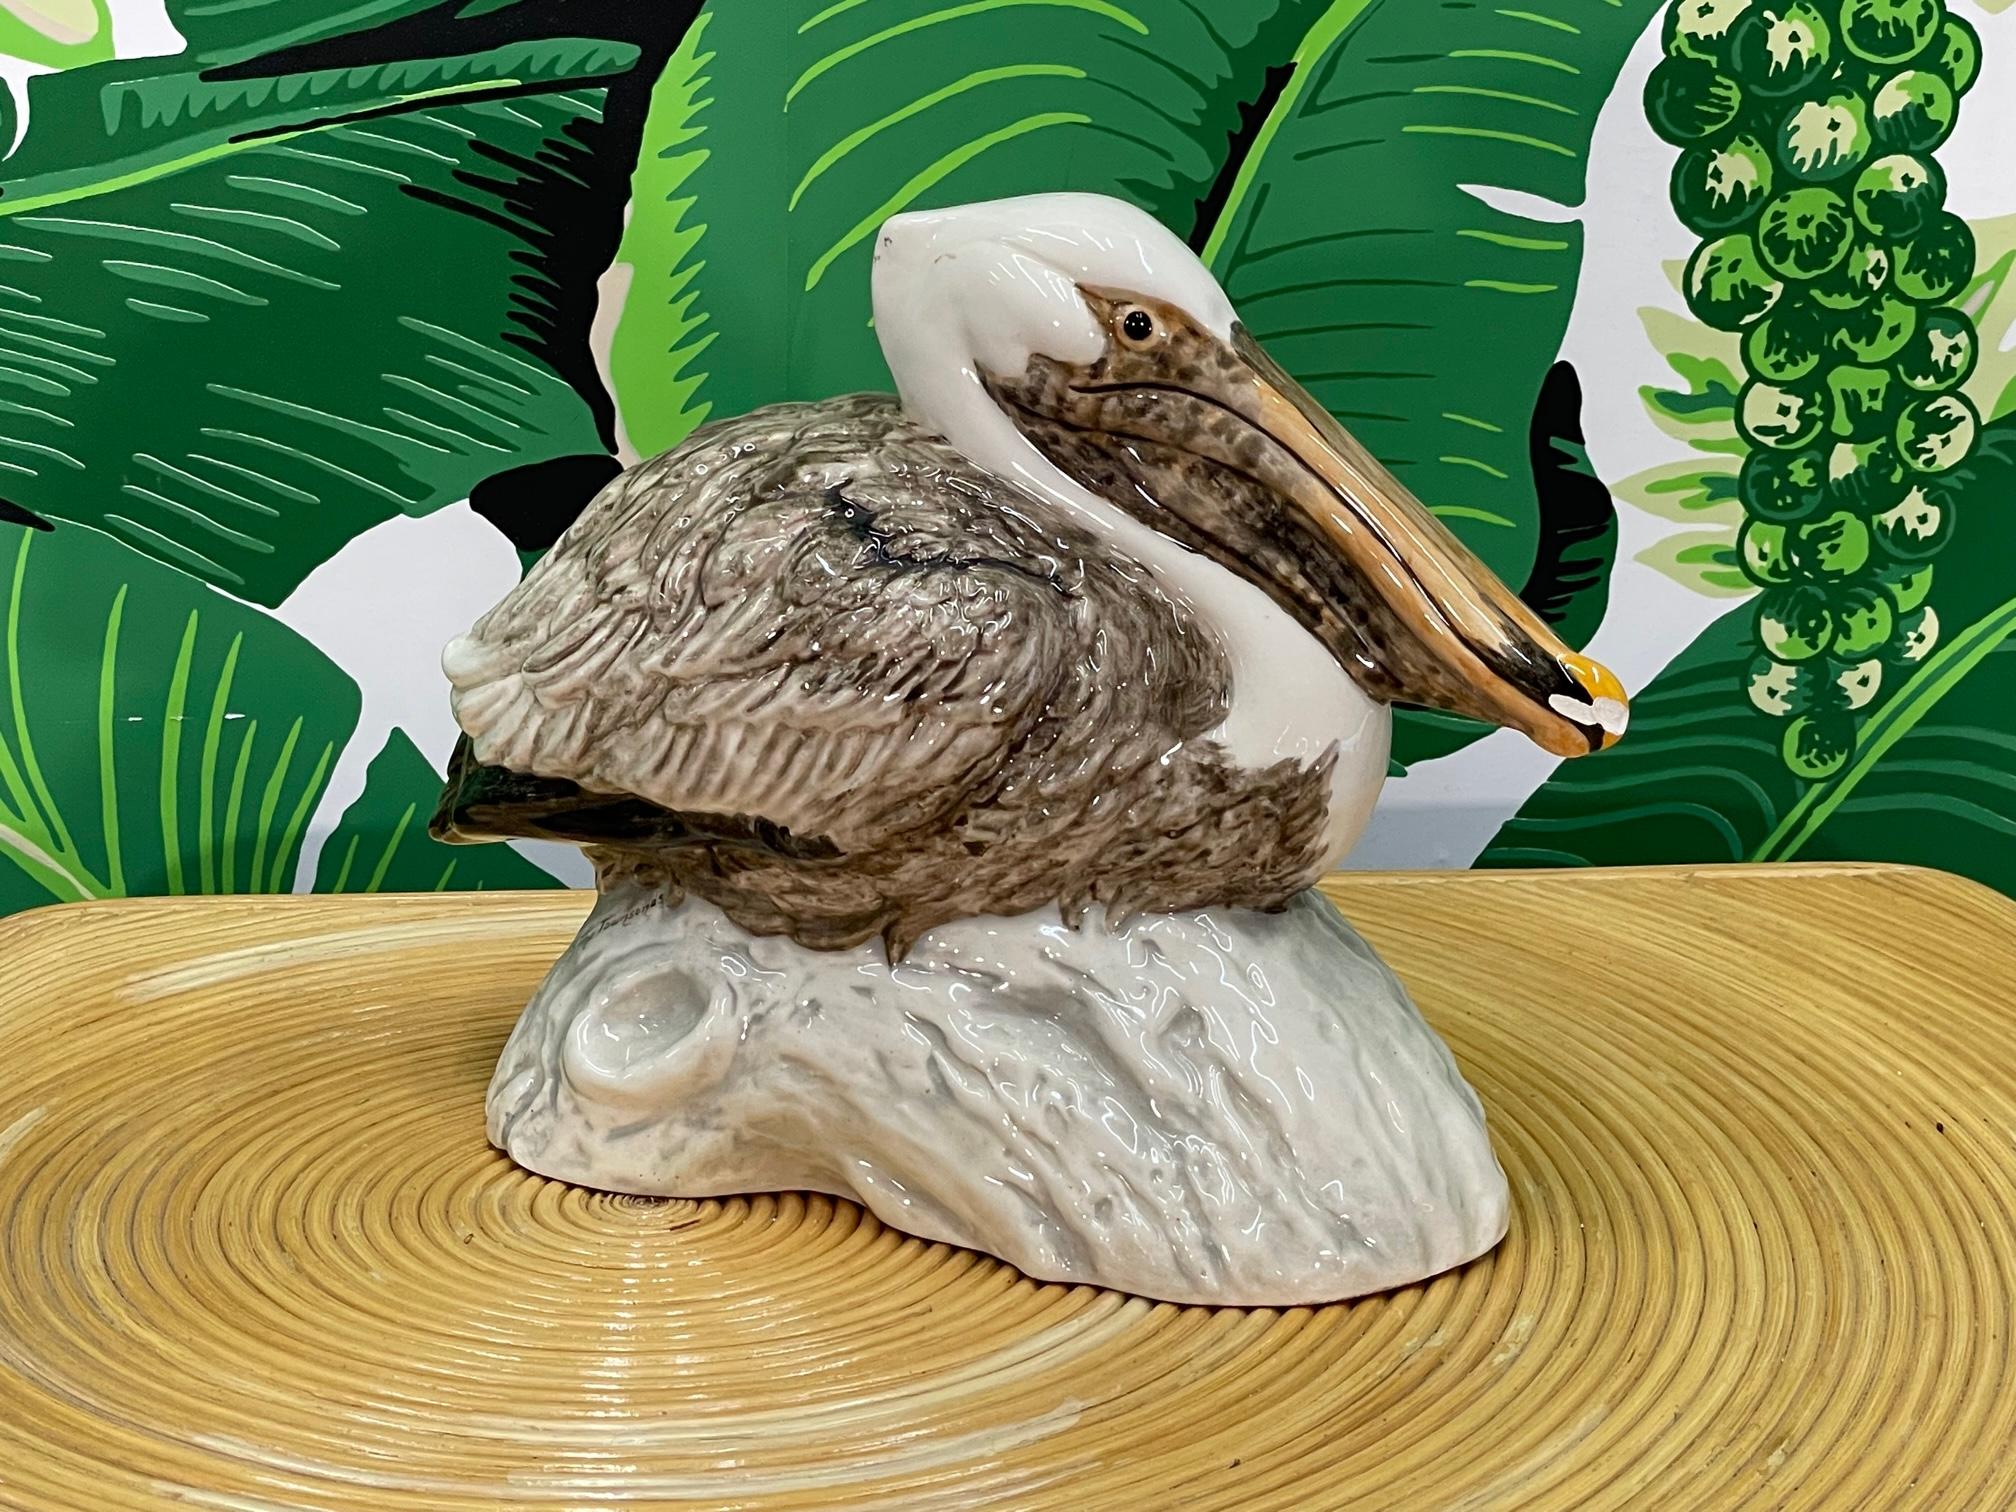 Ceramic pelican figurine statue features a colorful hand painted finish with a glossy glaze. Good condition with small chip on one side of beak (see photos).